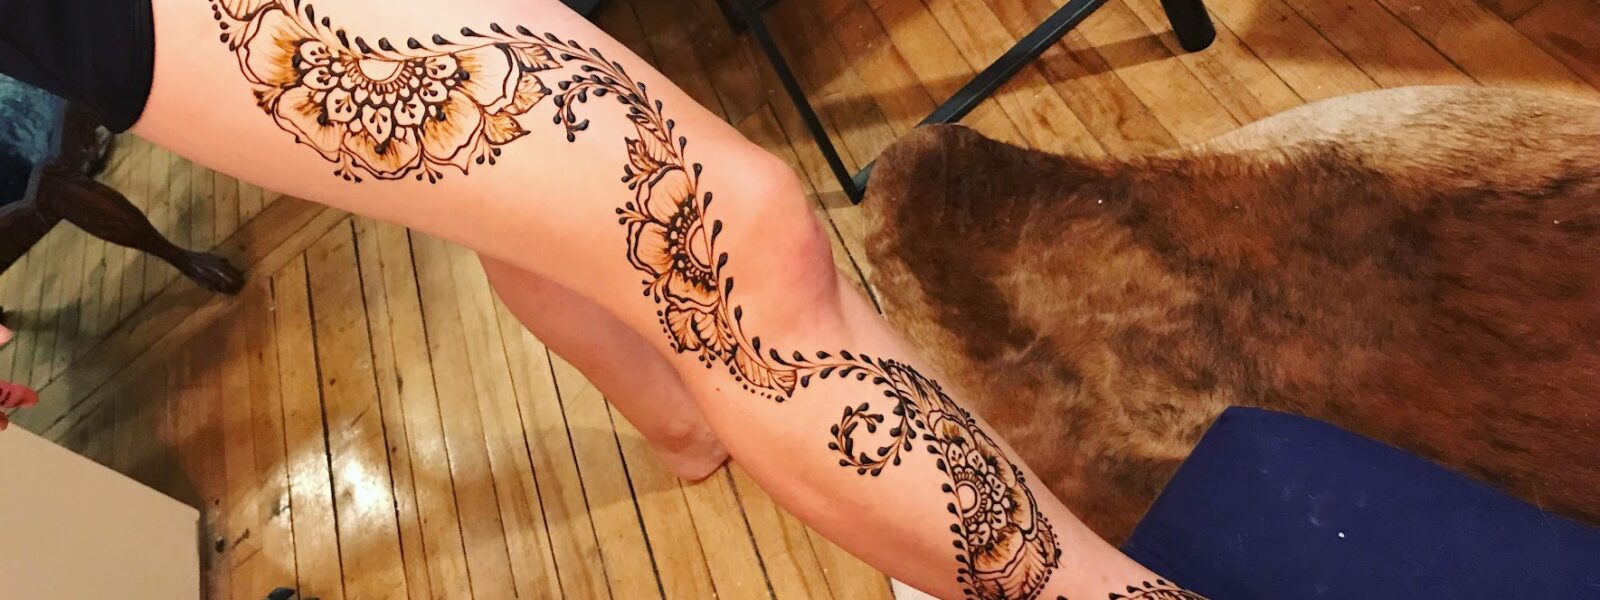 henna tattoo designs for feet and legs | via DotWallpapers.n… | Flickr